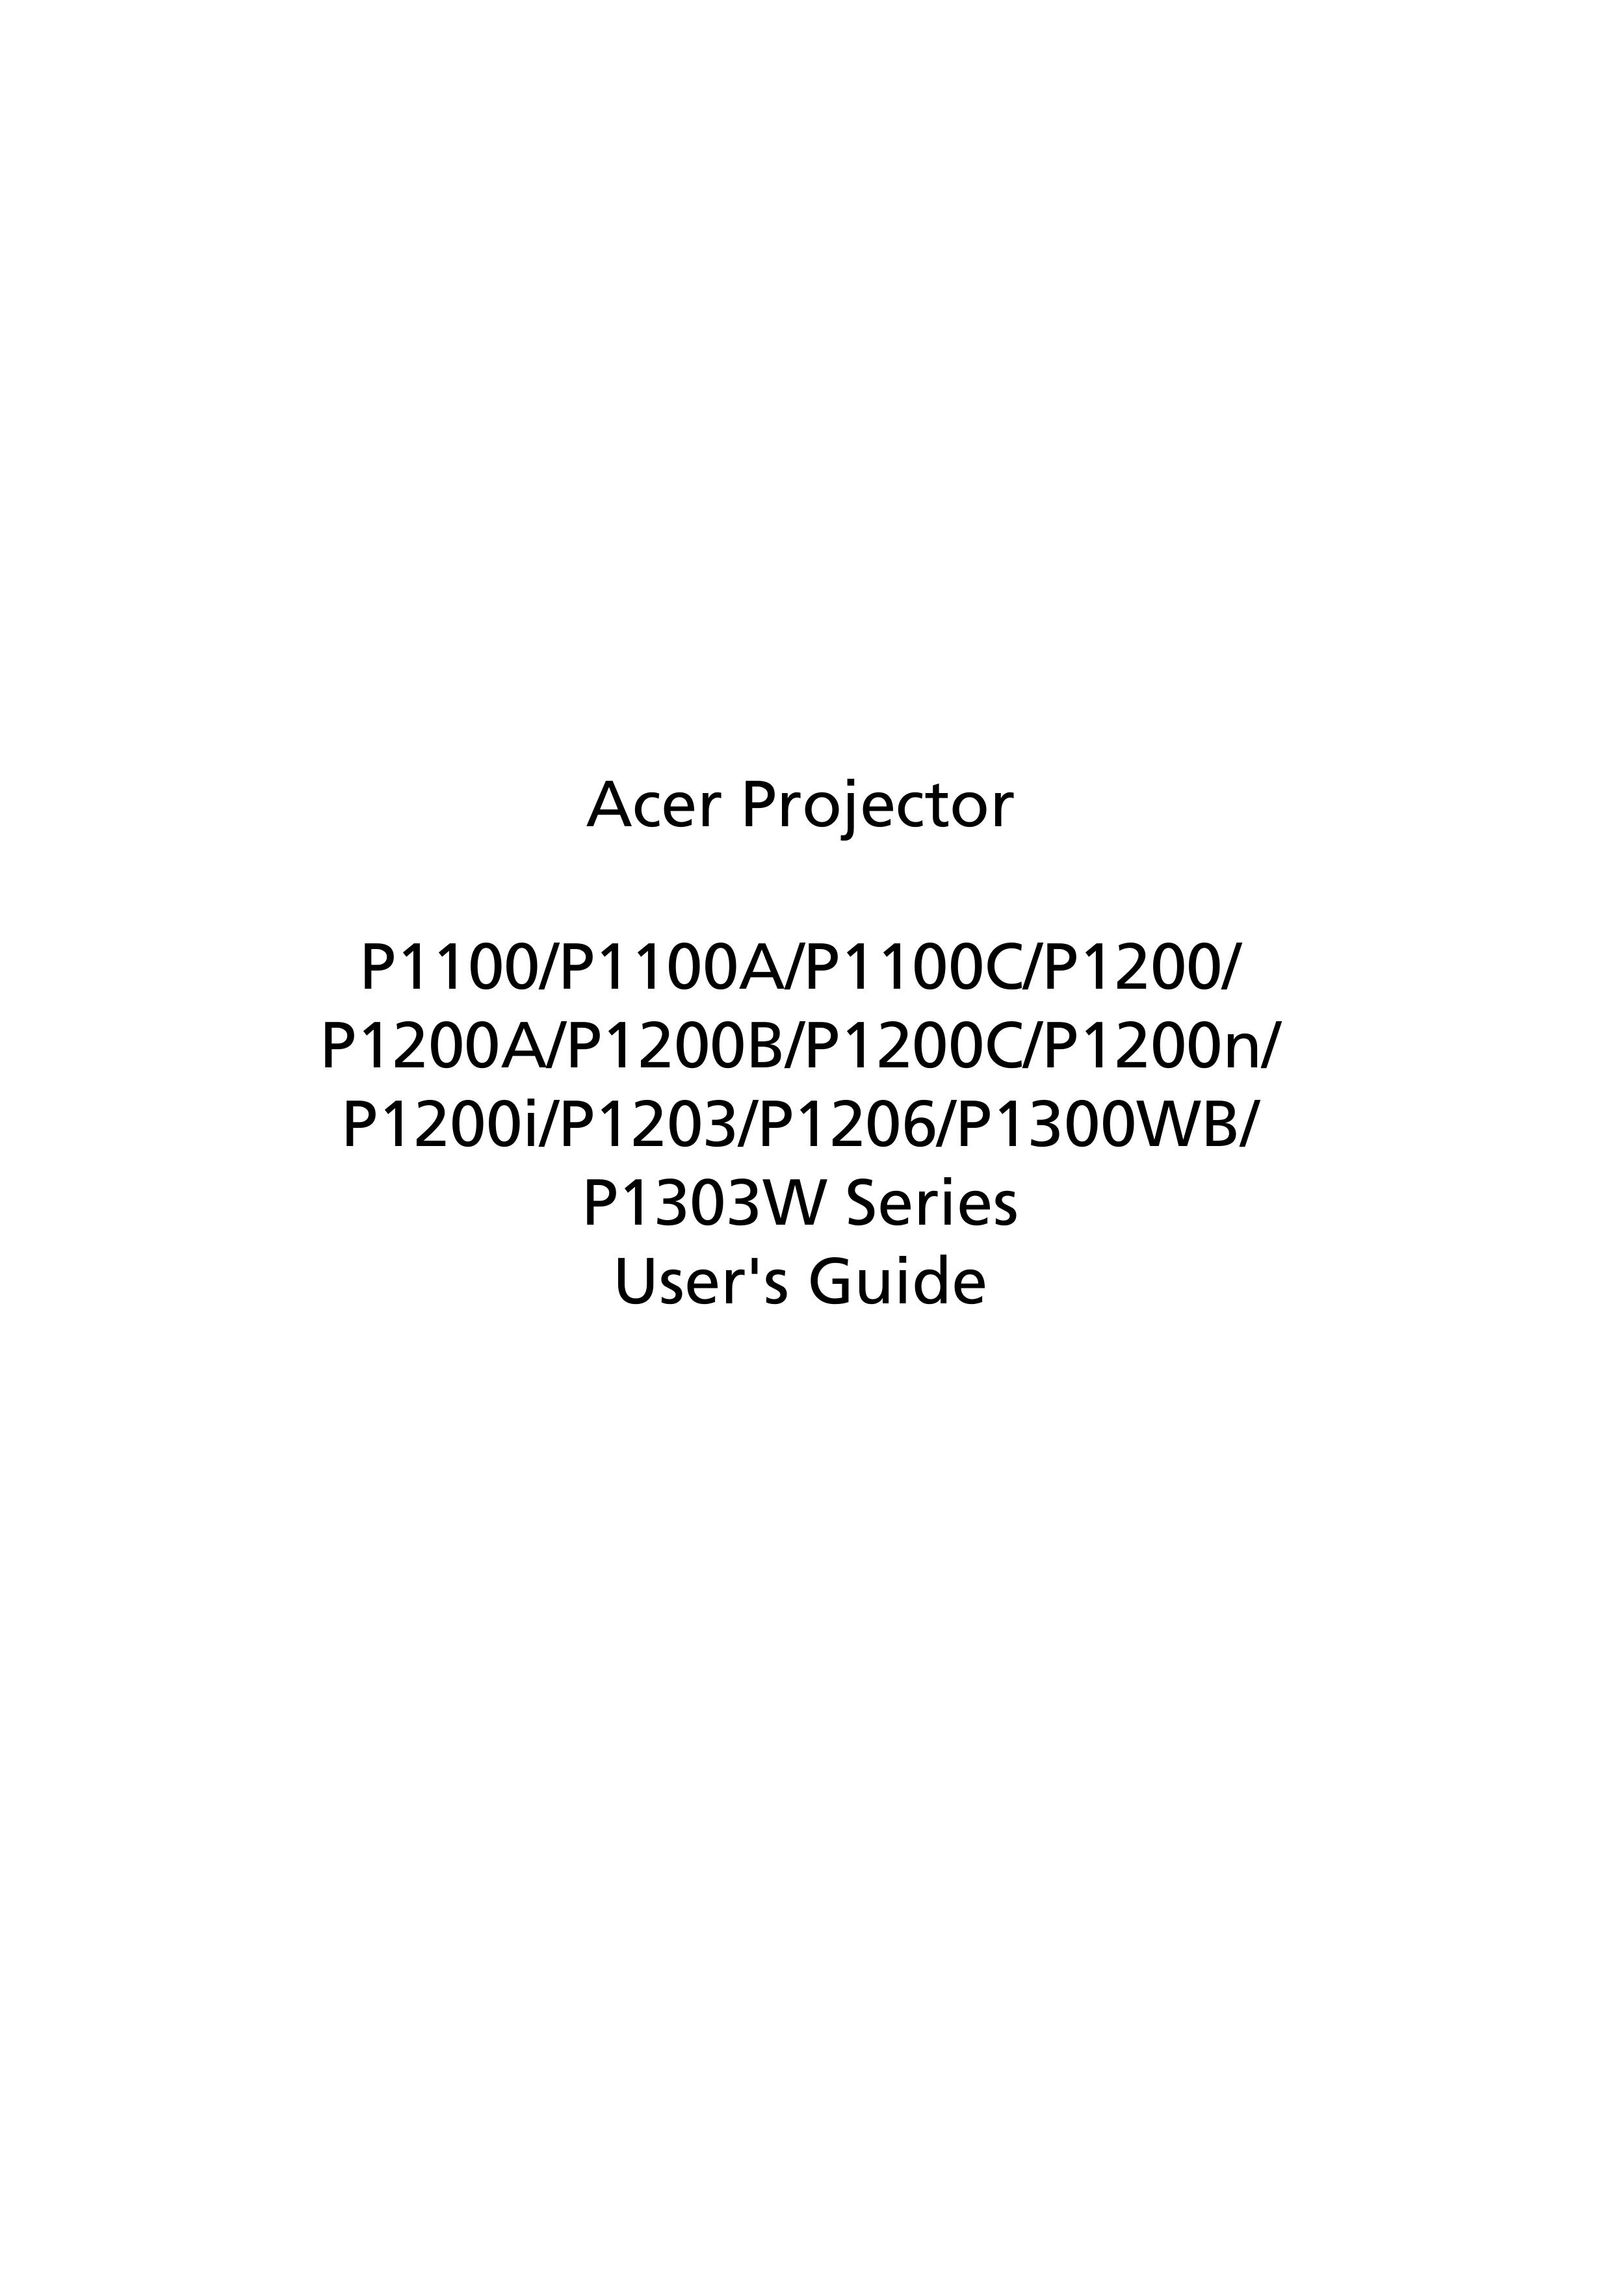 Acer P1200 Projector User Manual